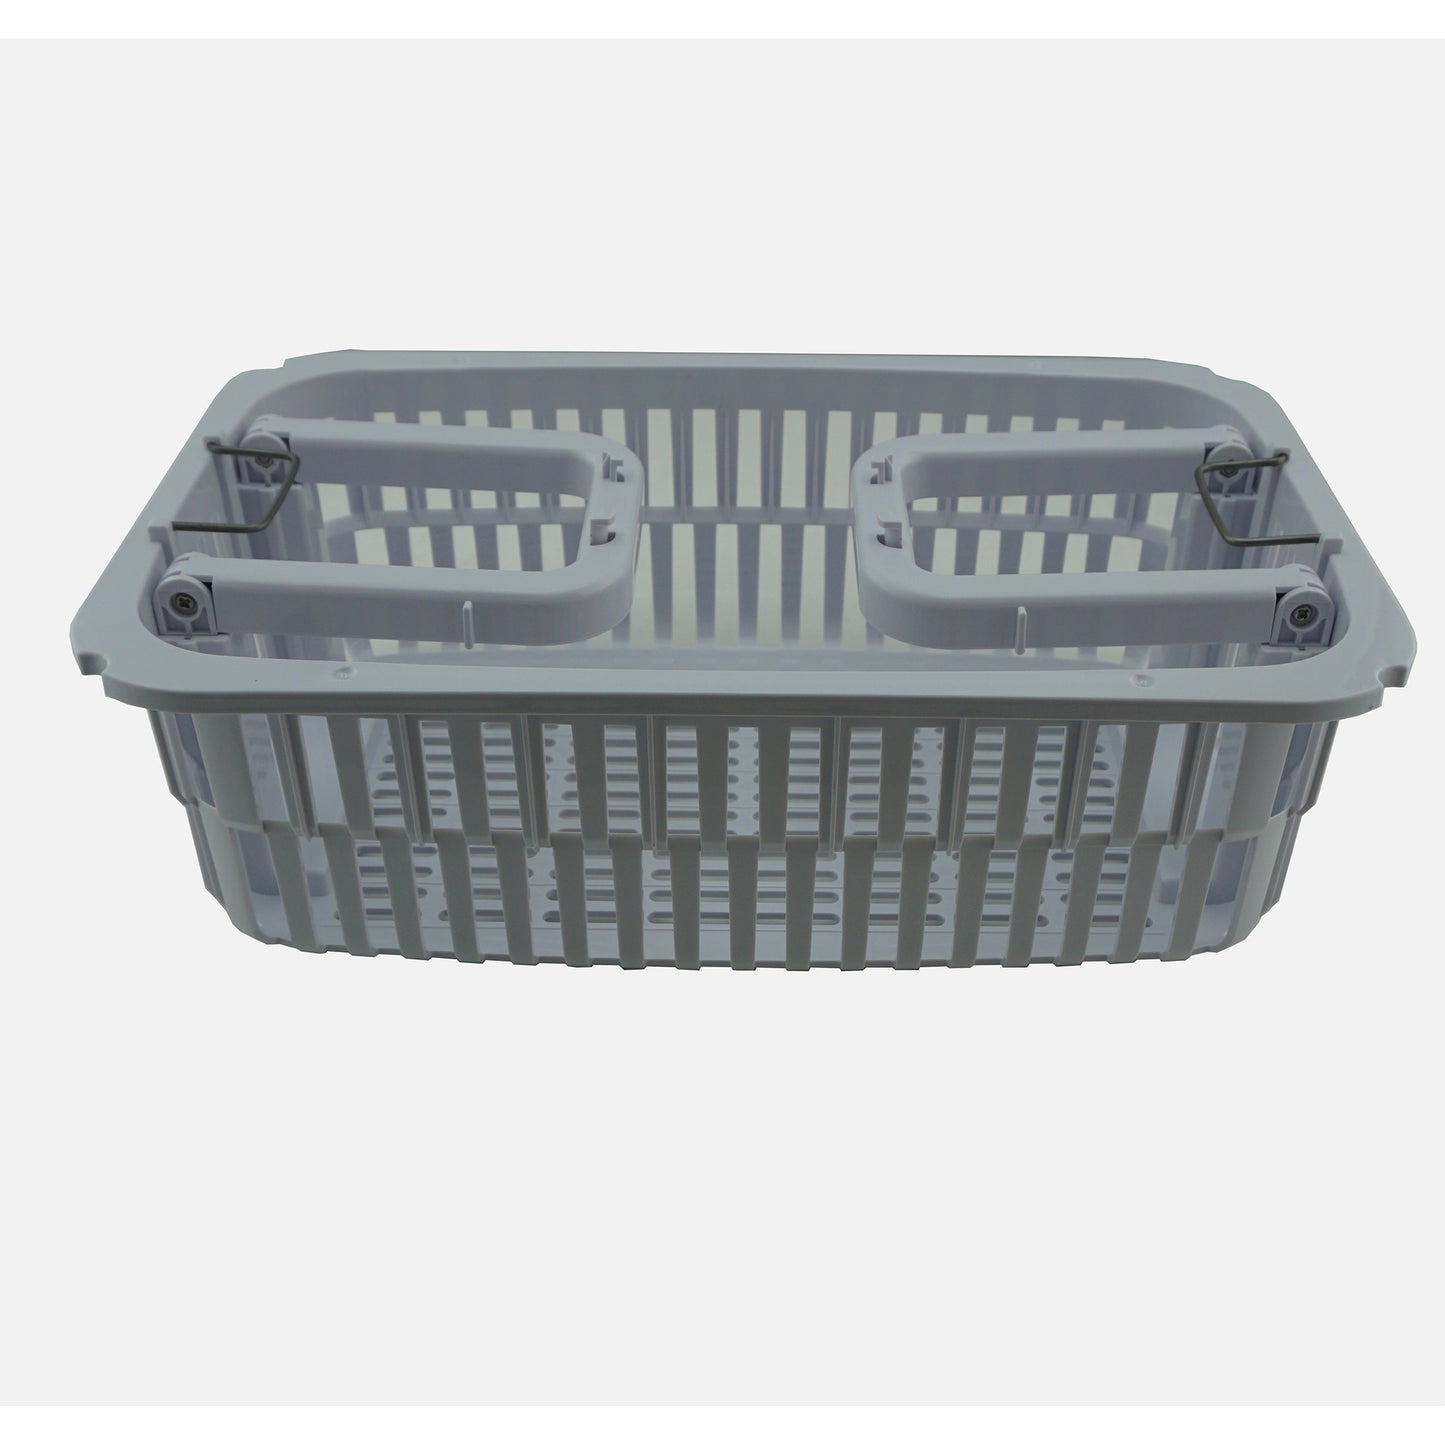 P4875 | iSonic® Commercial Ultrasonic Cleaner, 2Gal/7.5L, suspend-able plastic basket, heater, drain